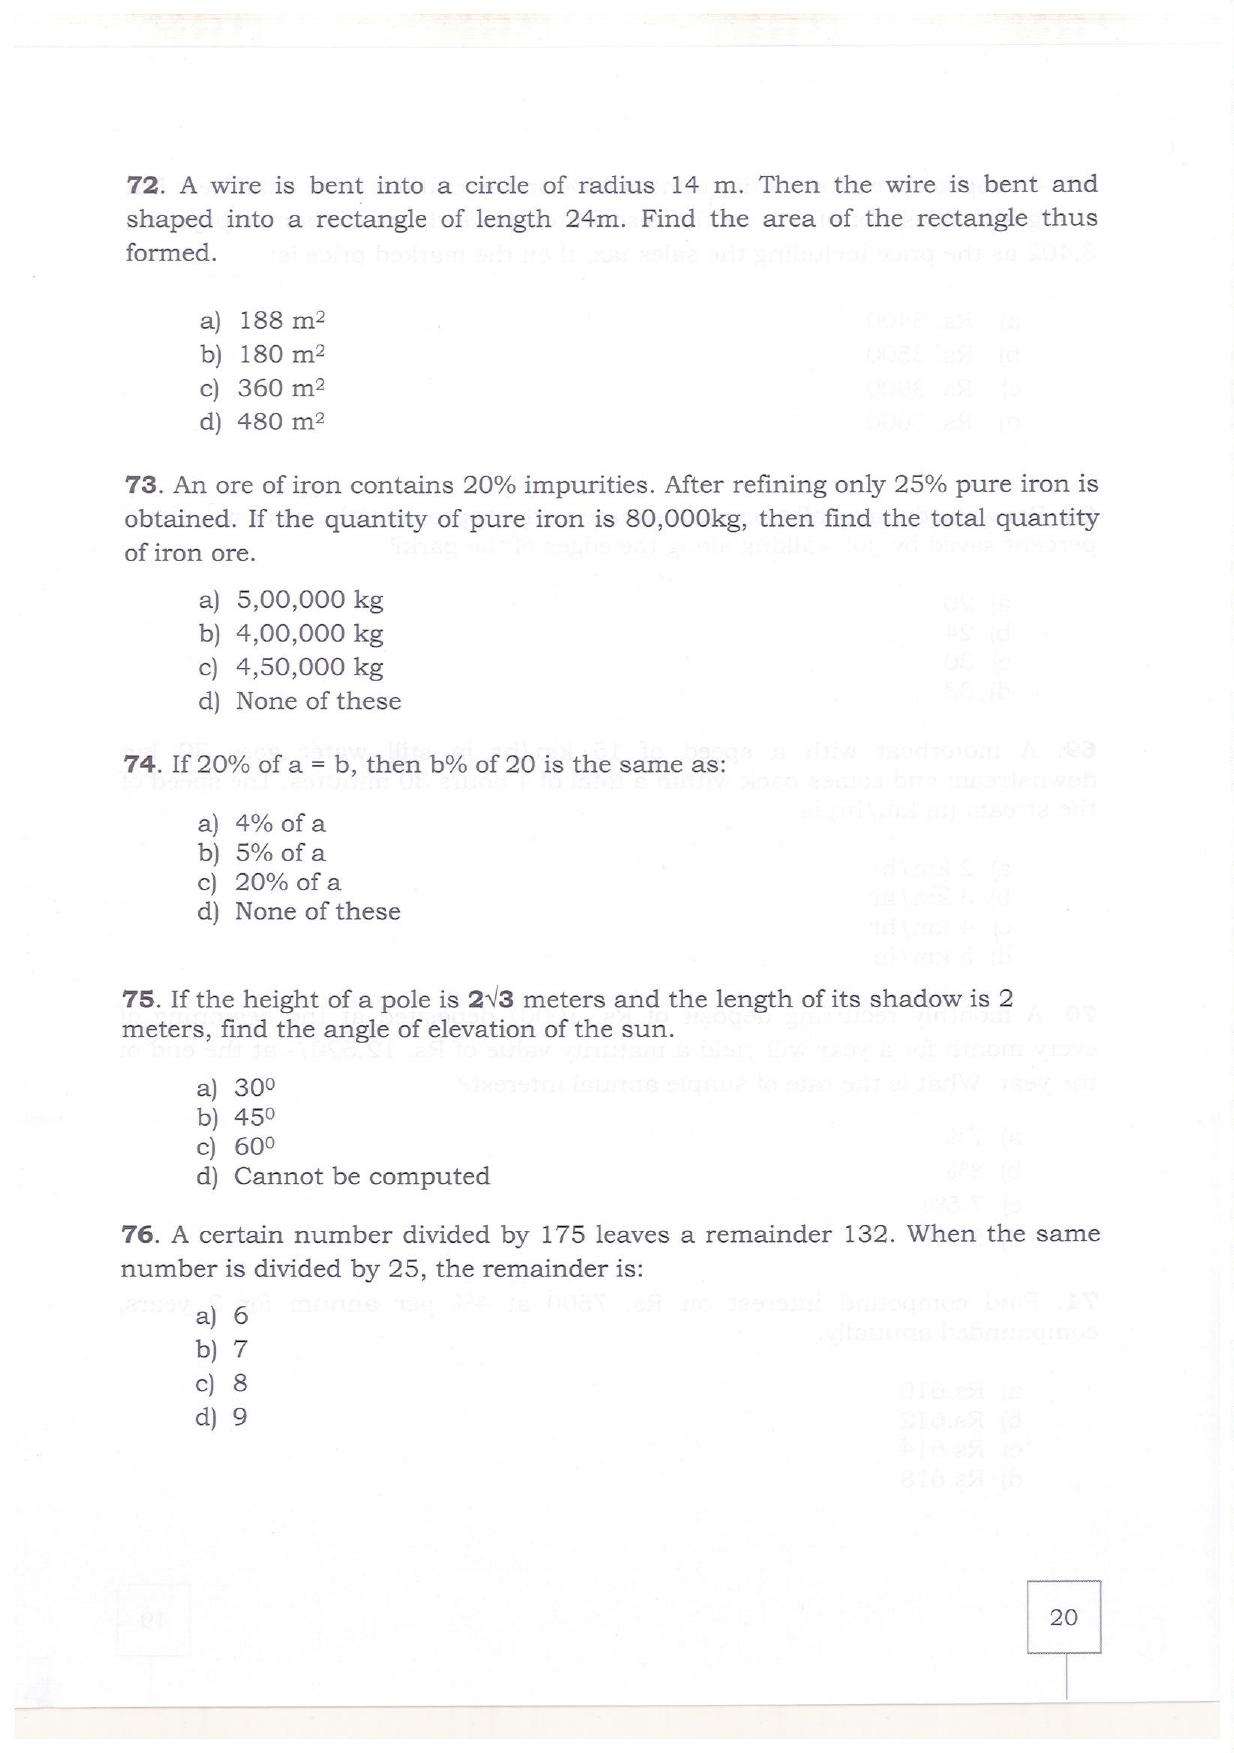 KMAT Question Papers - February 2019 - Page 18